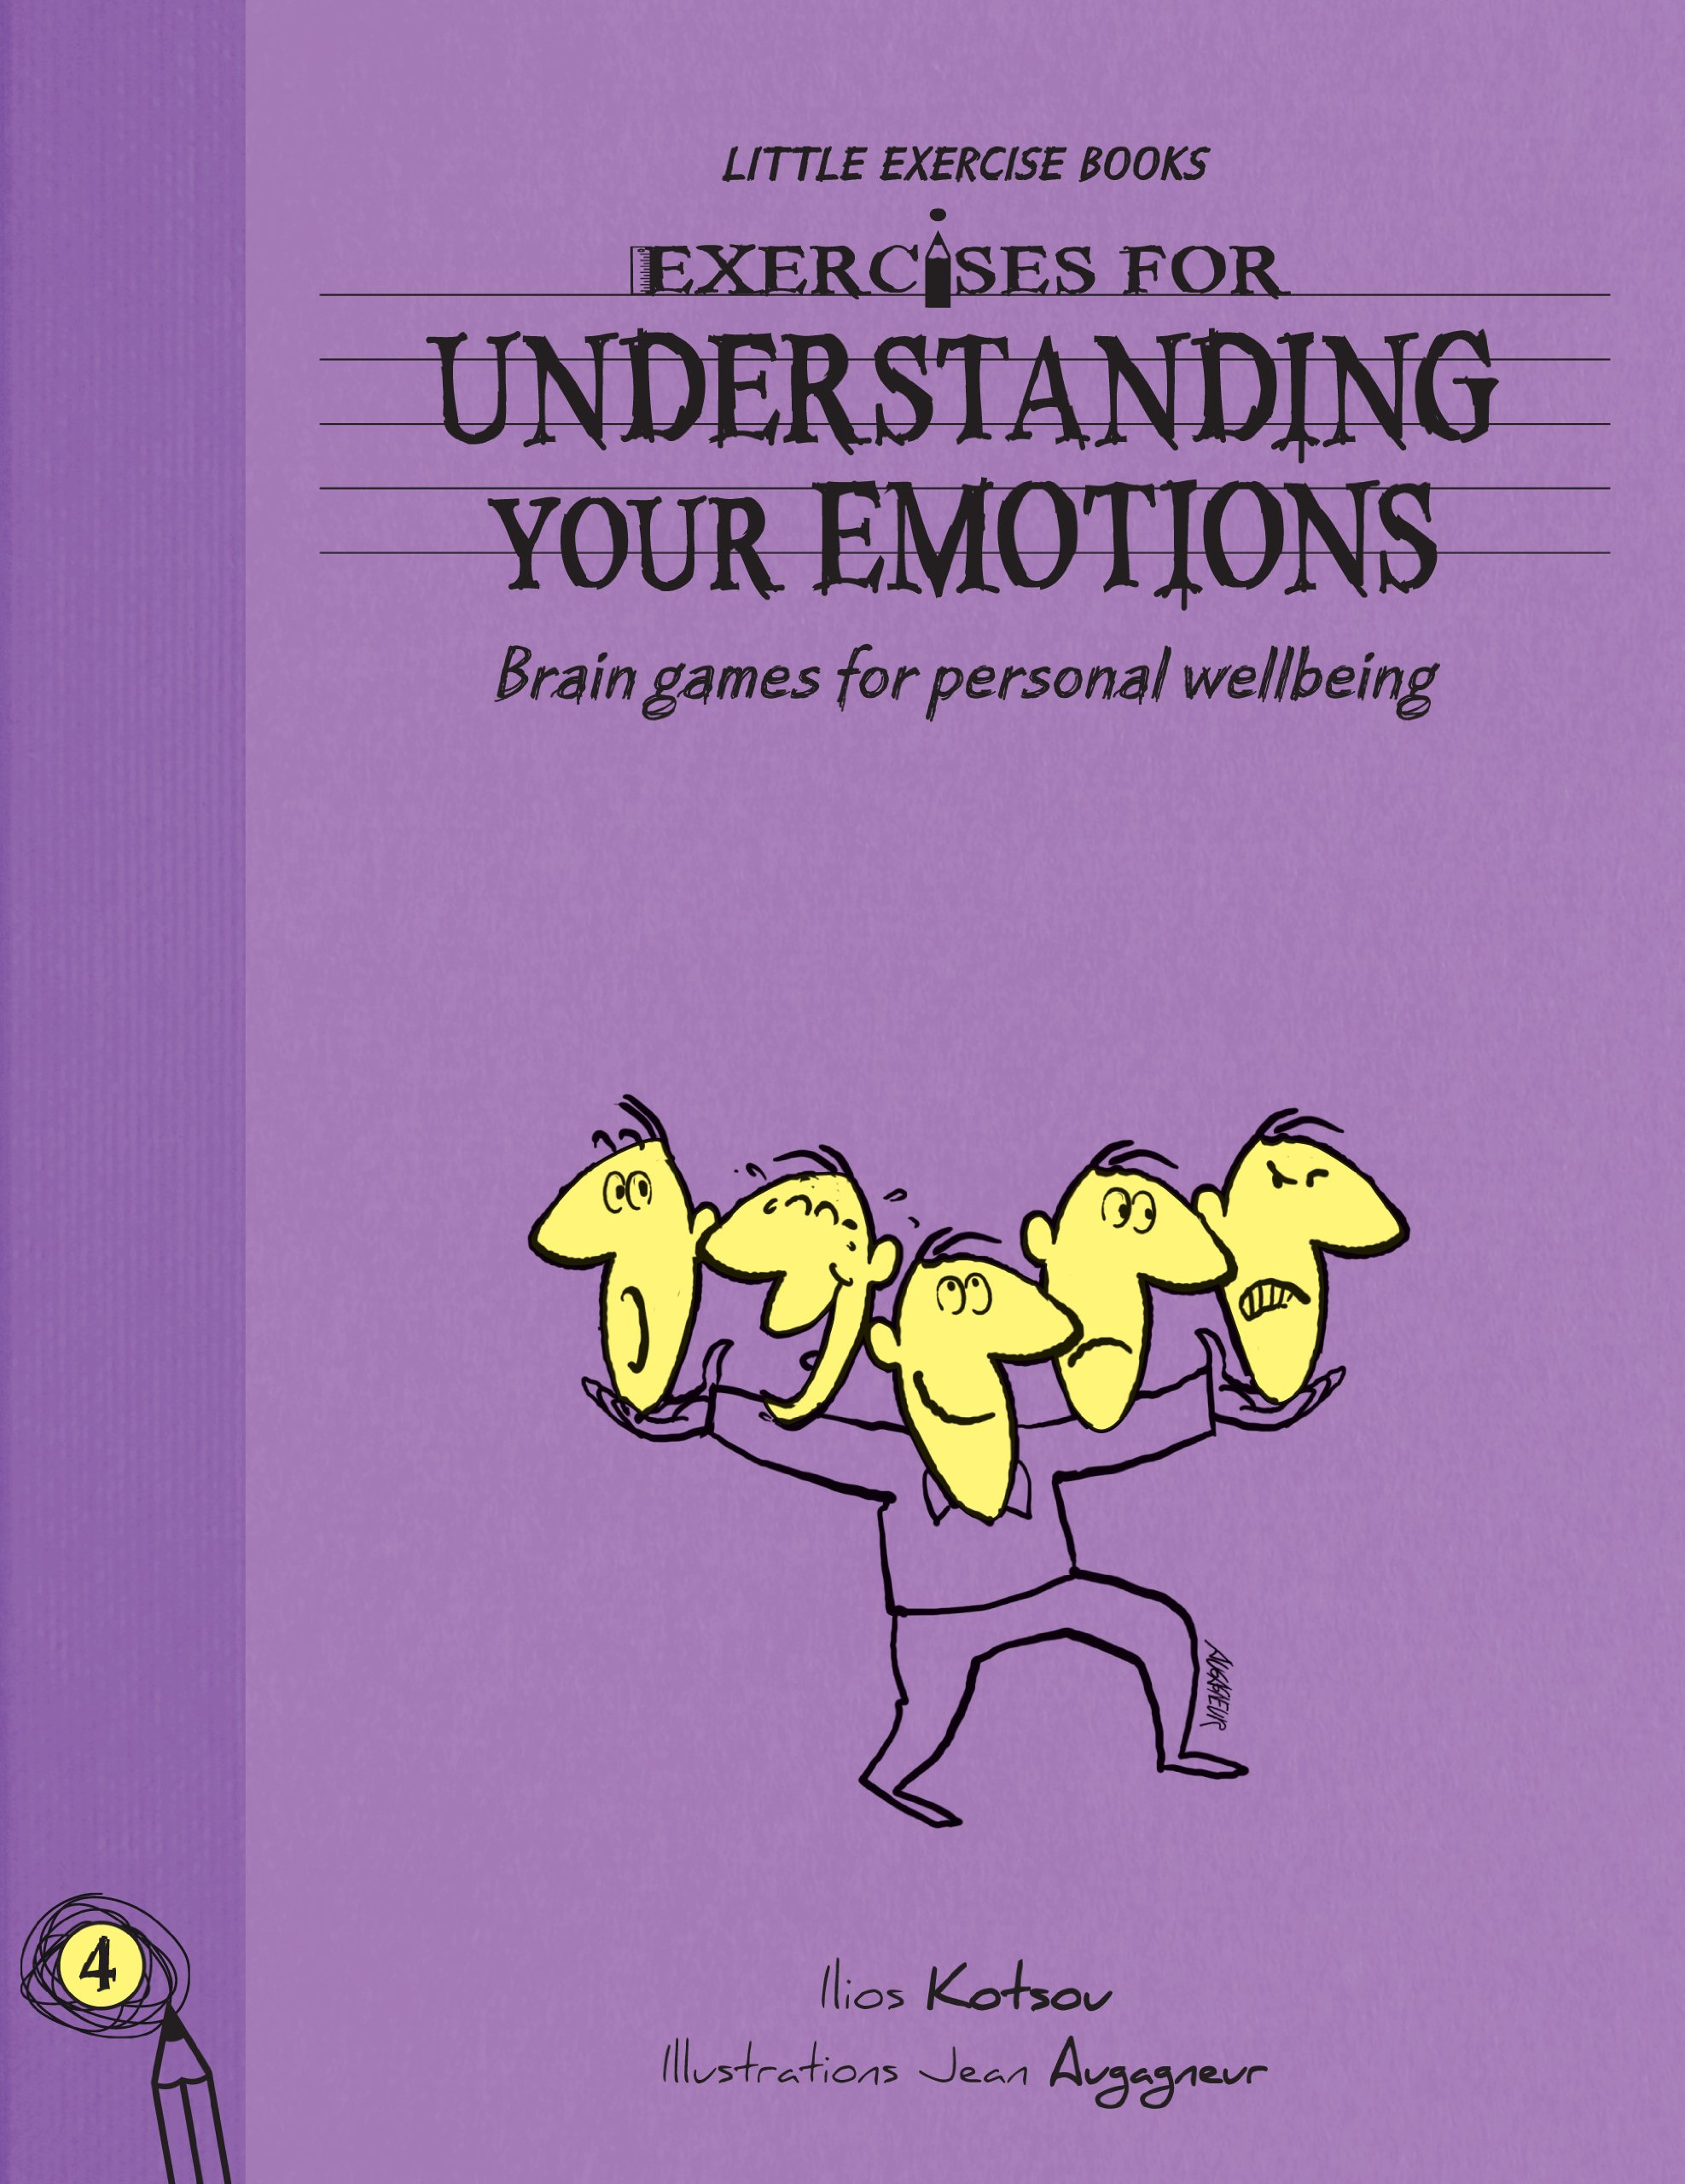 Understanding Your Emotions - Jean Augagneur